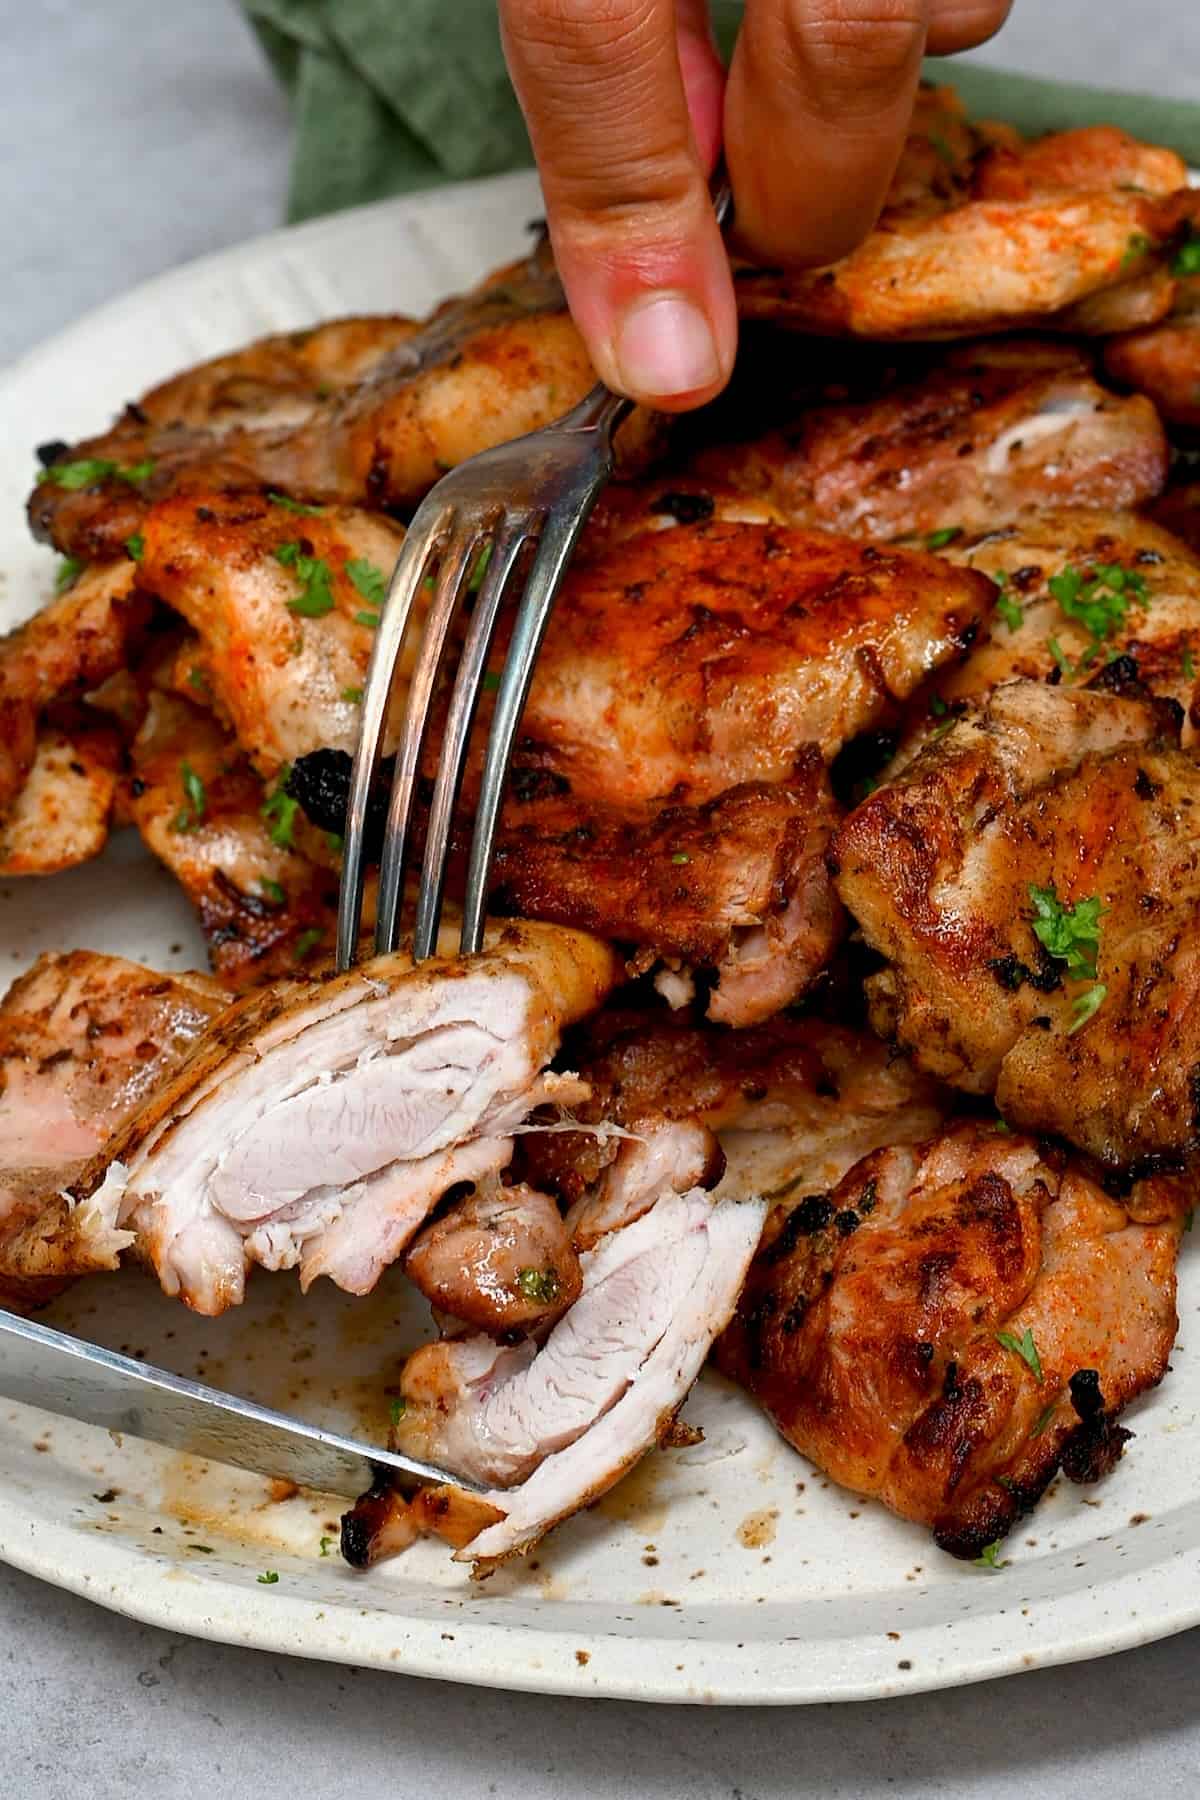 A forkful of grilled boneless skinless chicken thighs